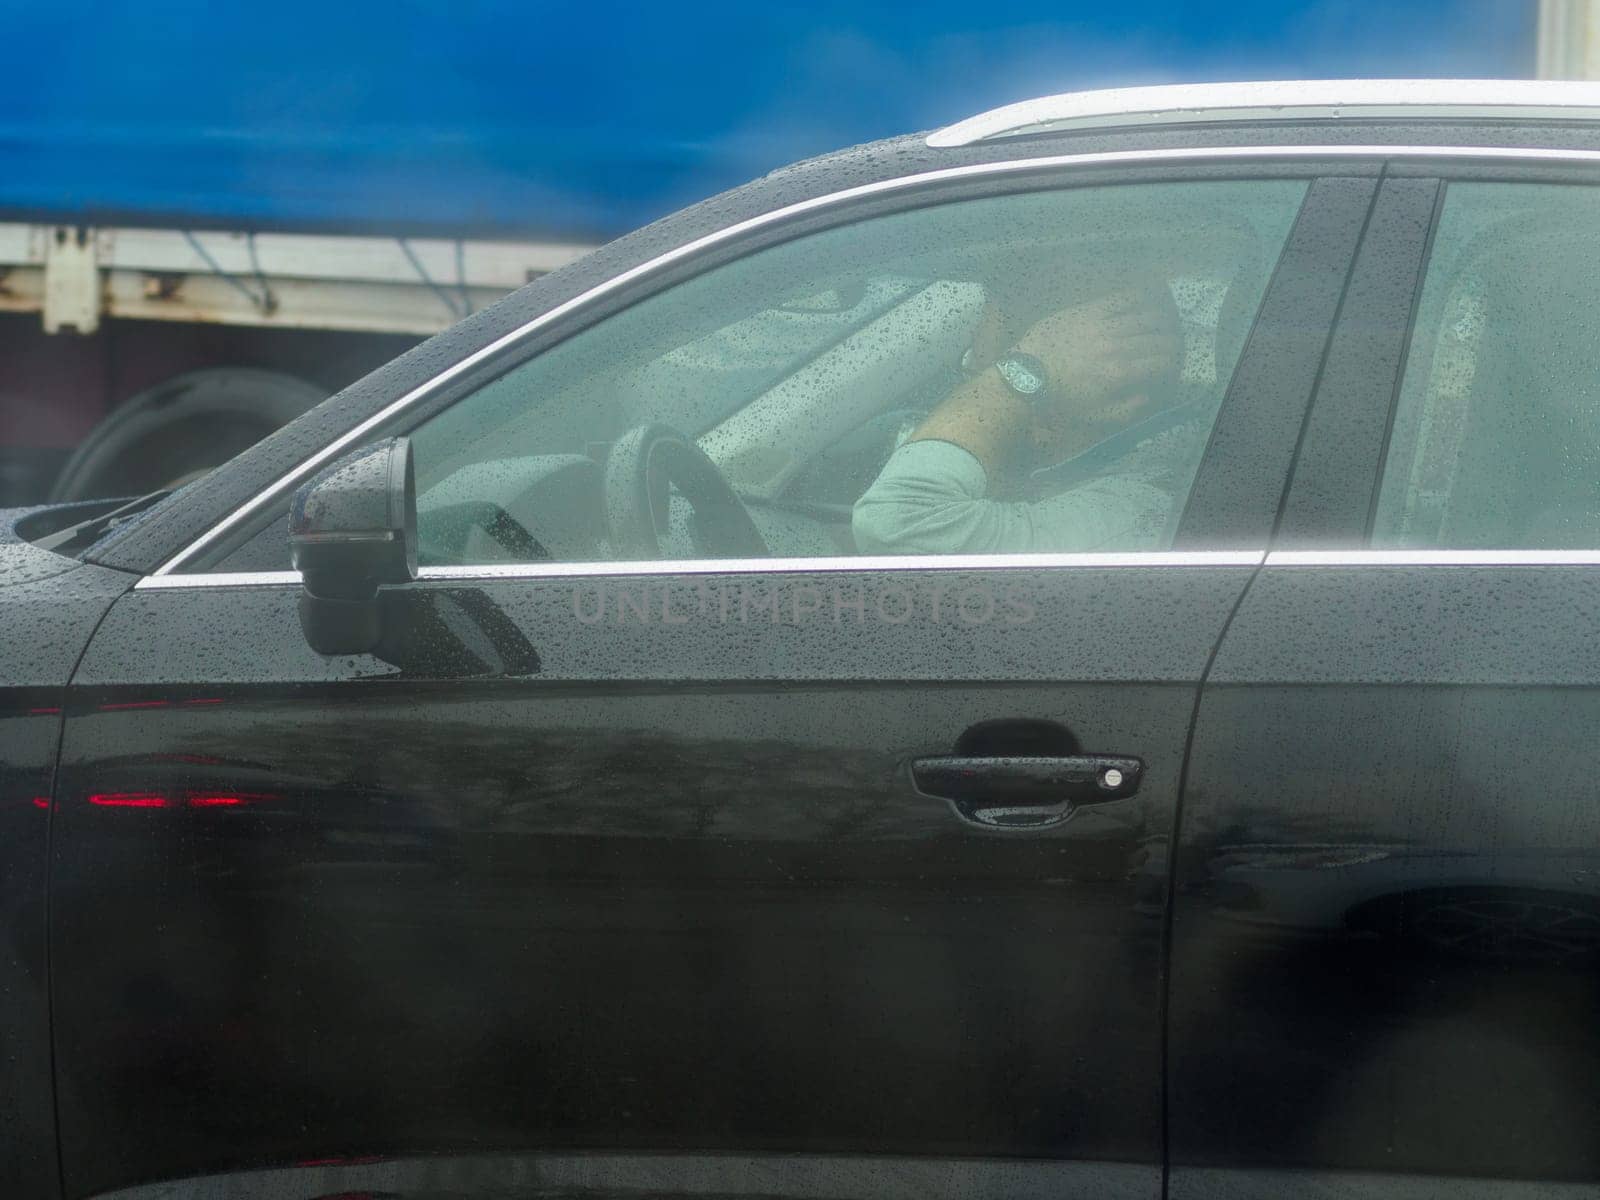 A person is sleeping in the driver's seat of a black car. The car is parked in a parking lot